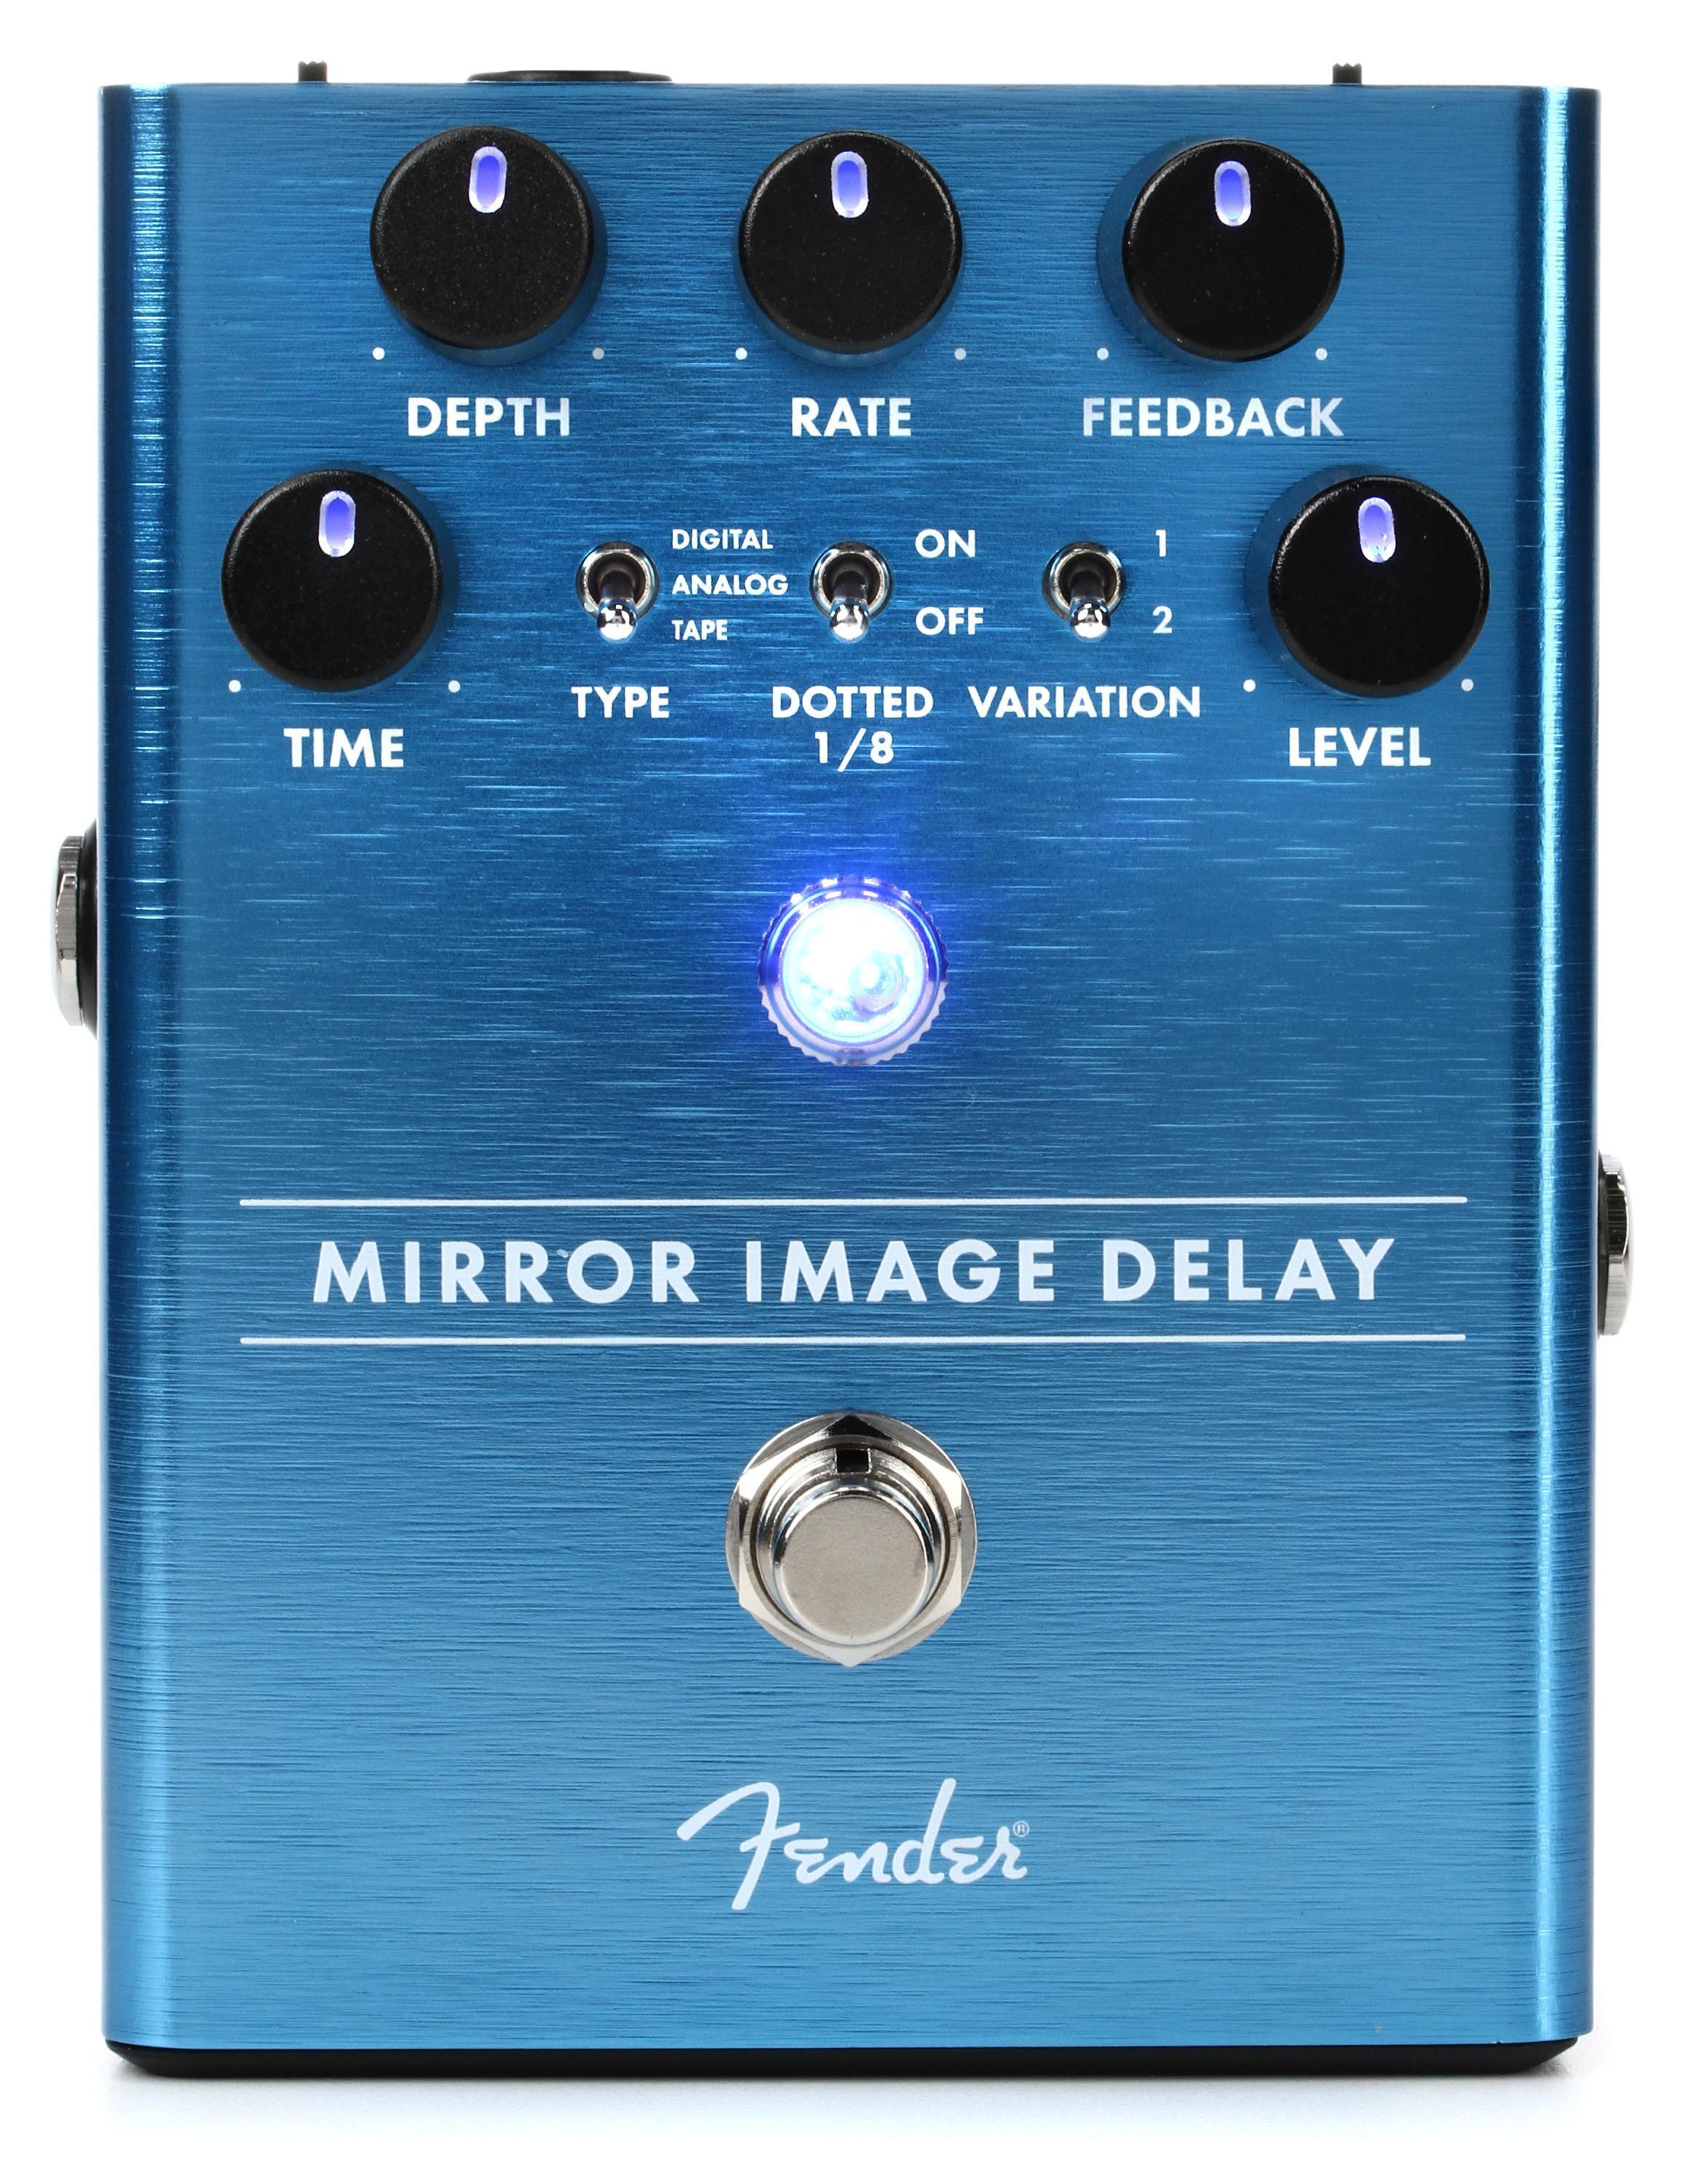 Image　Delay　Pedal　Sweetwater　Fender　Mirror